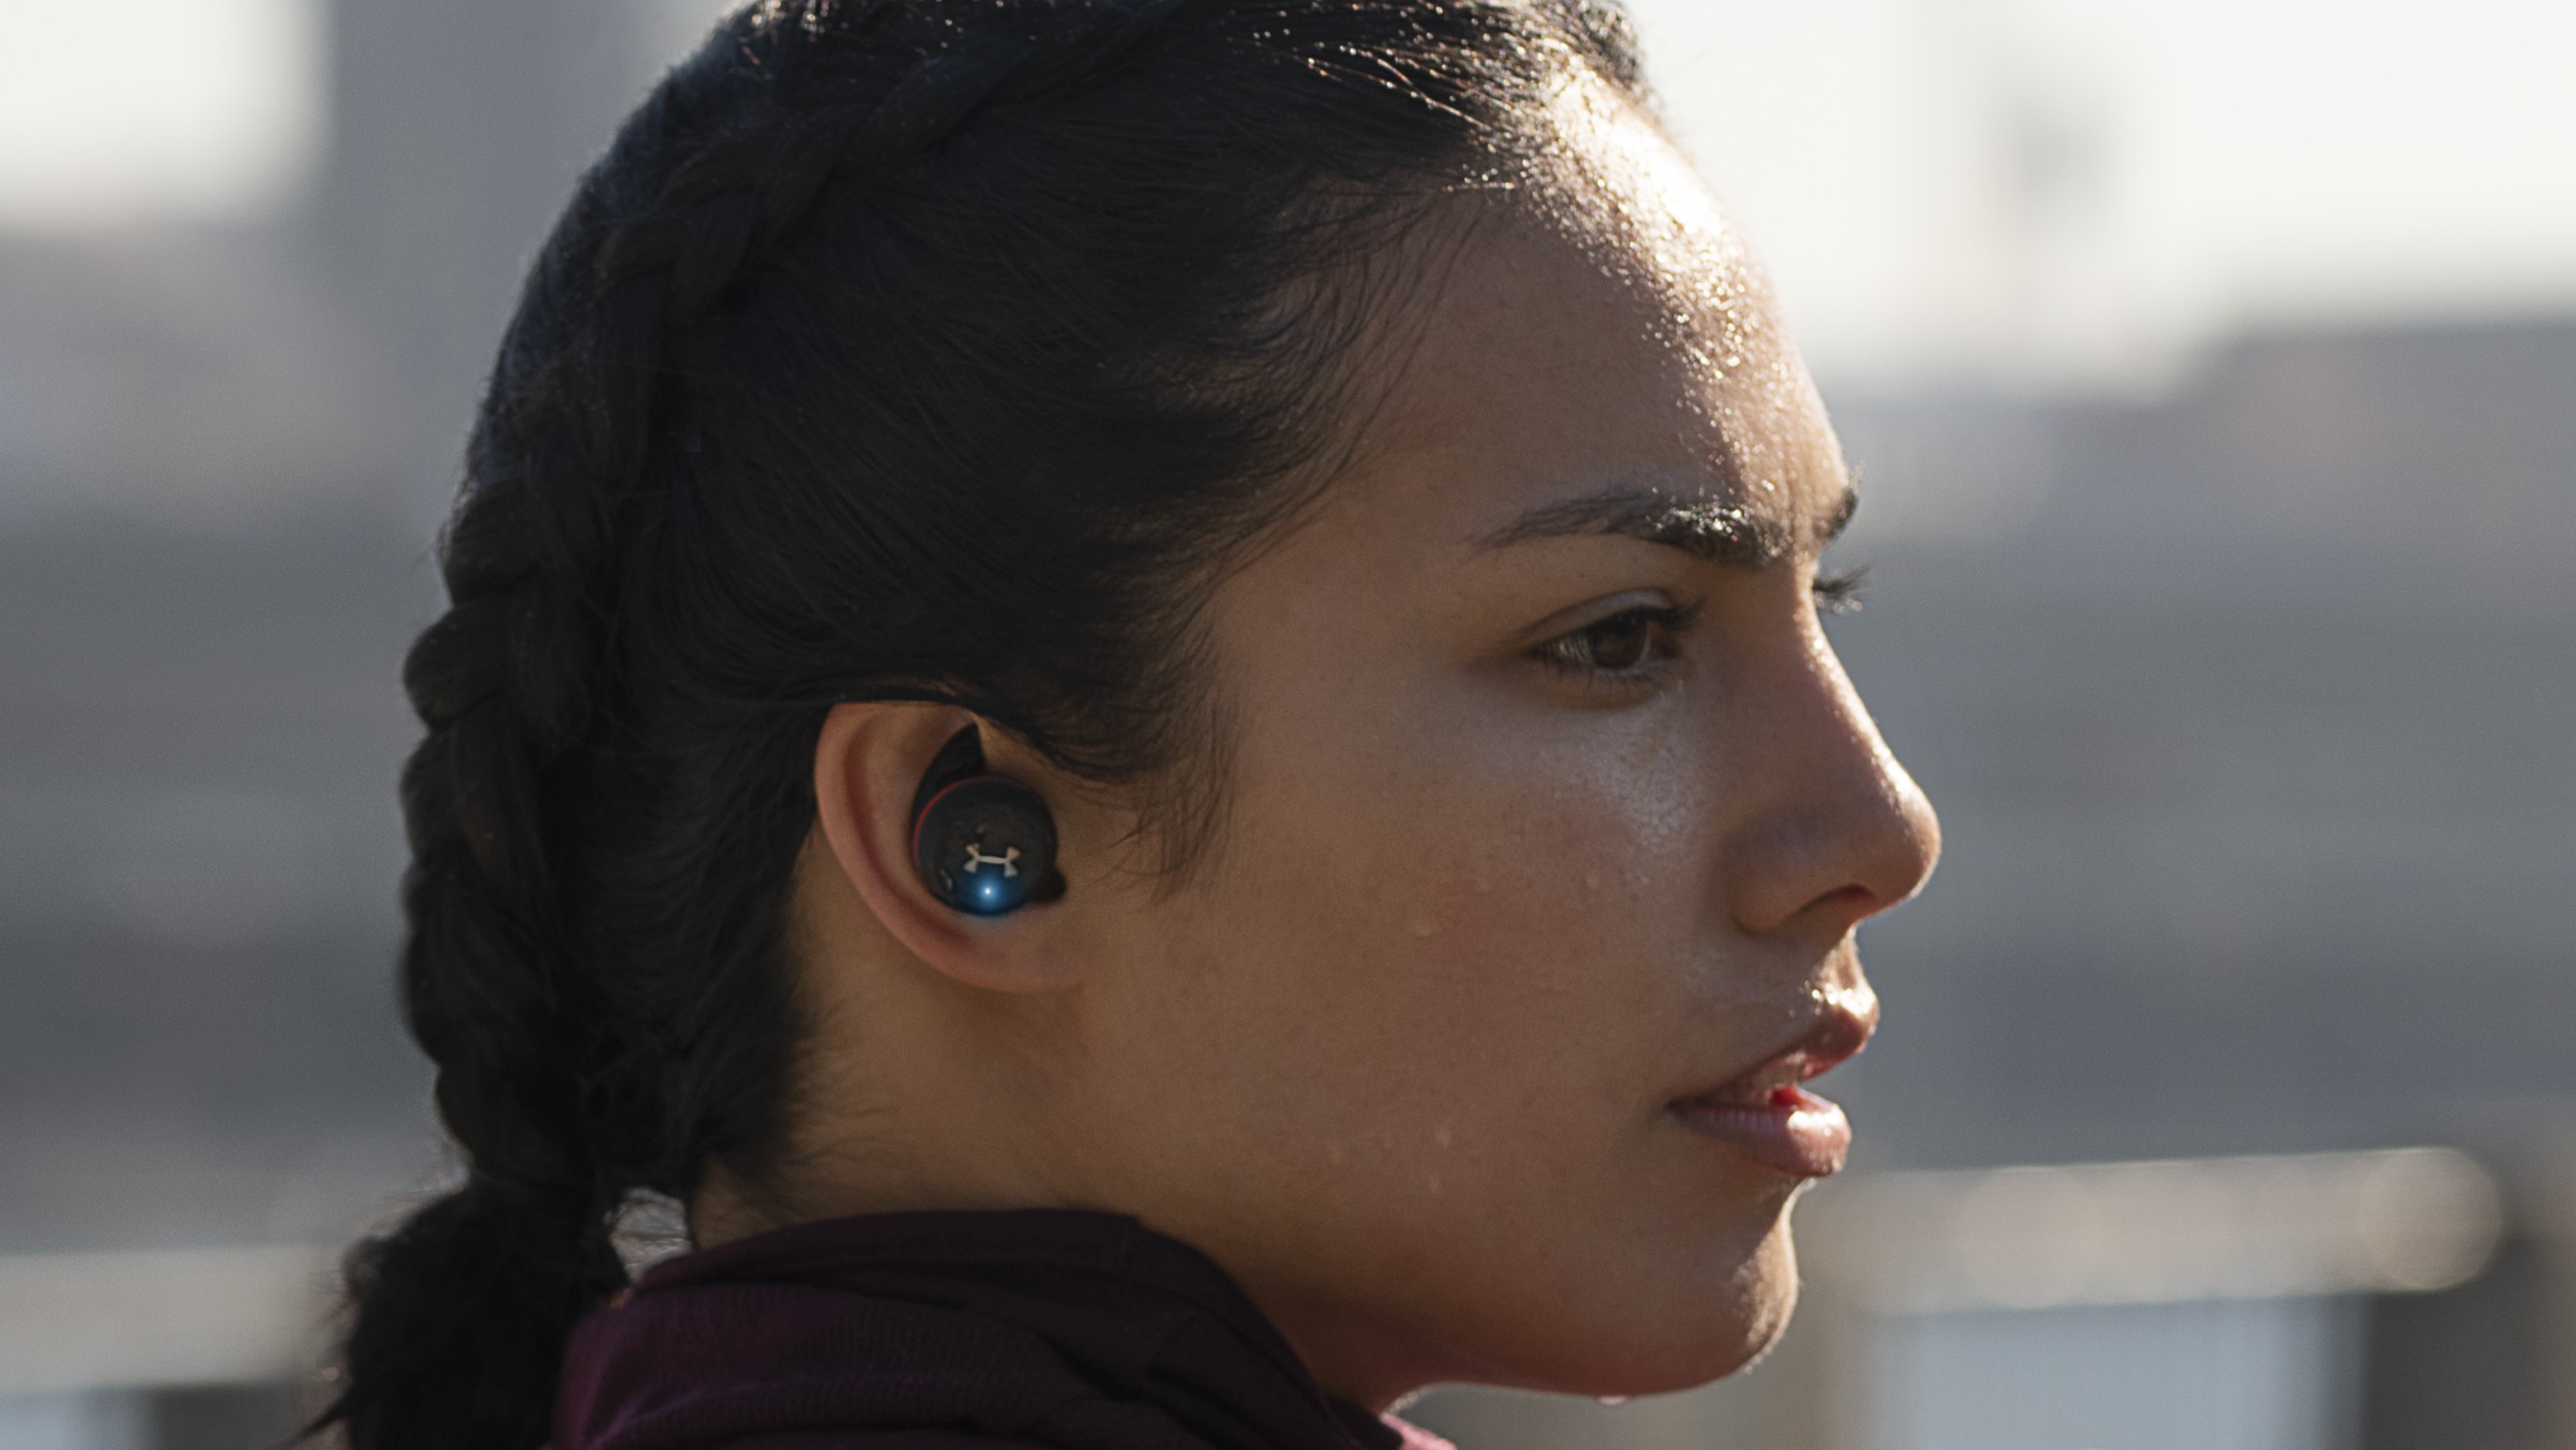 under armour truly wireless earbuds